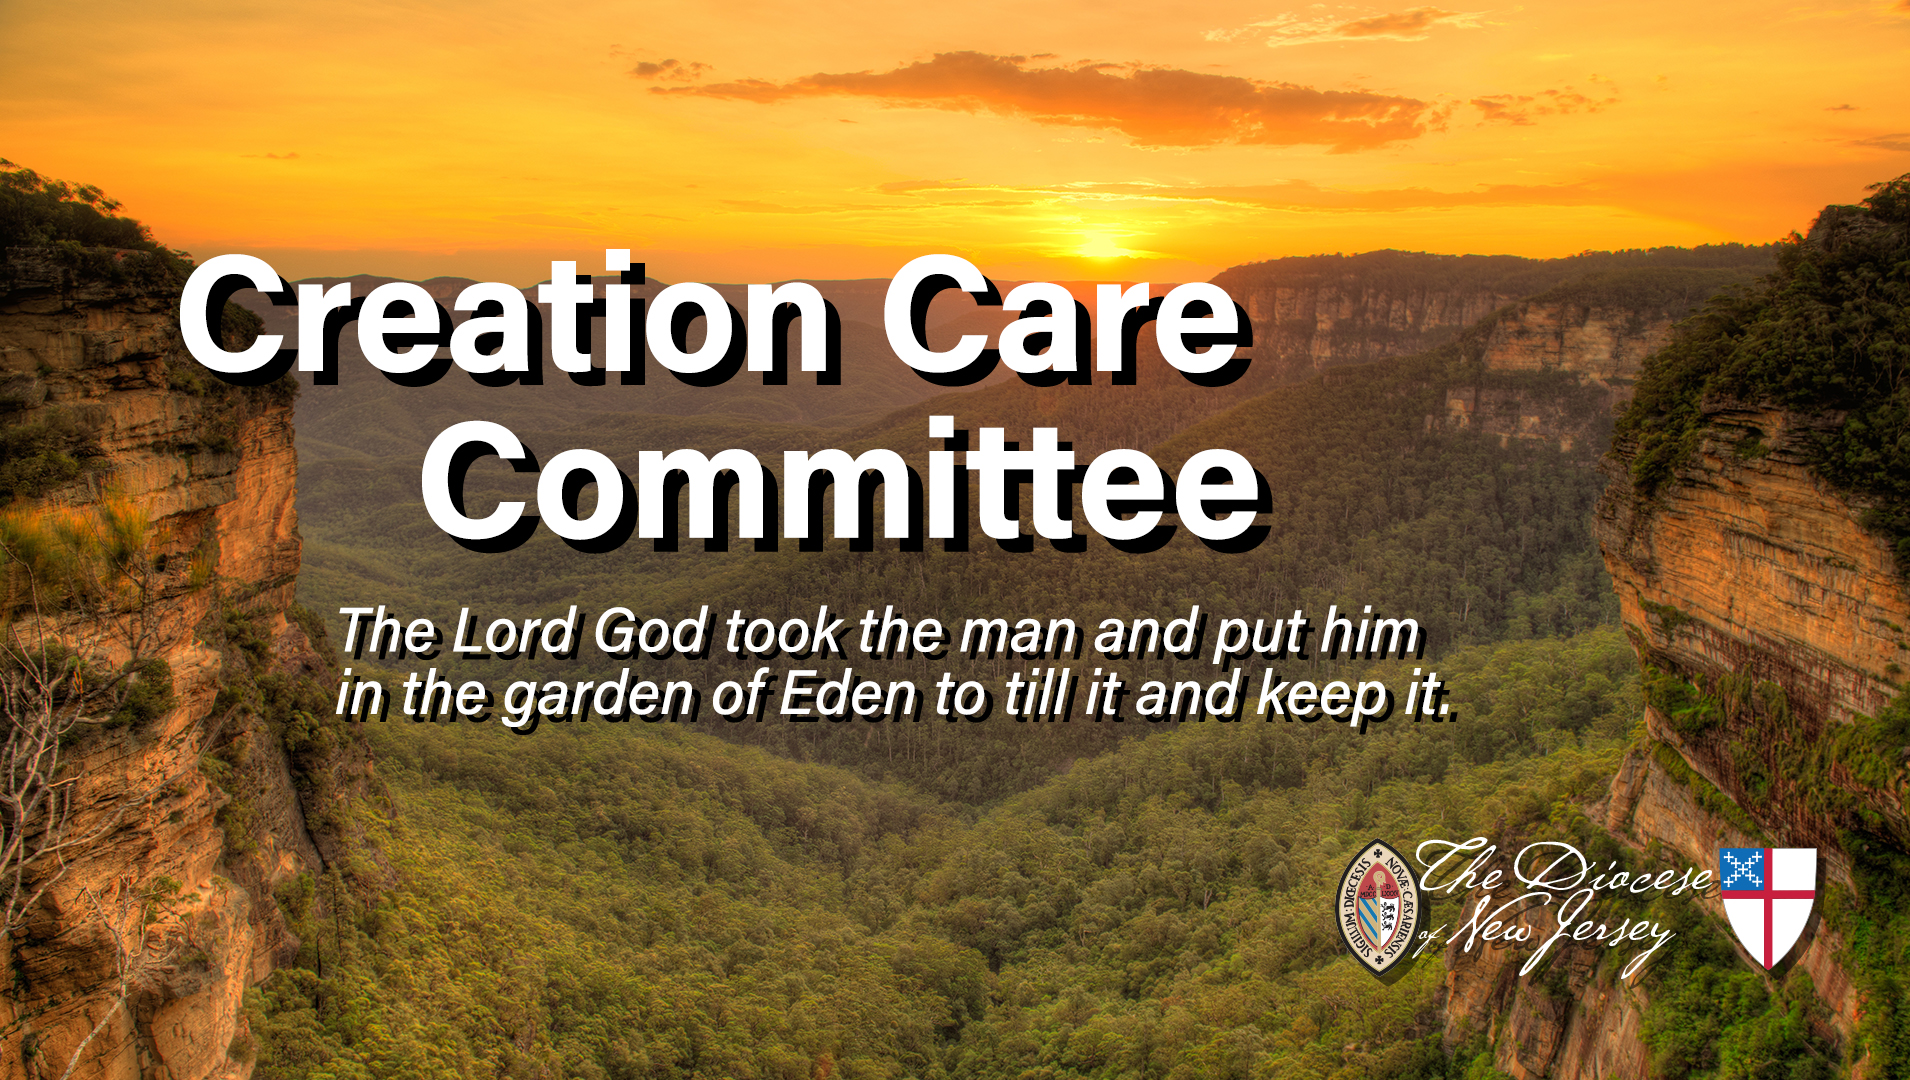 Creation Care Committee